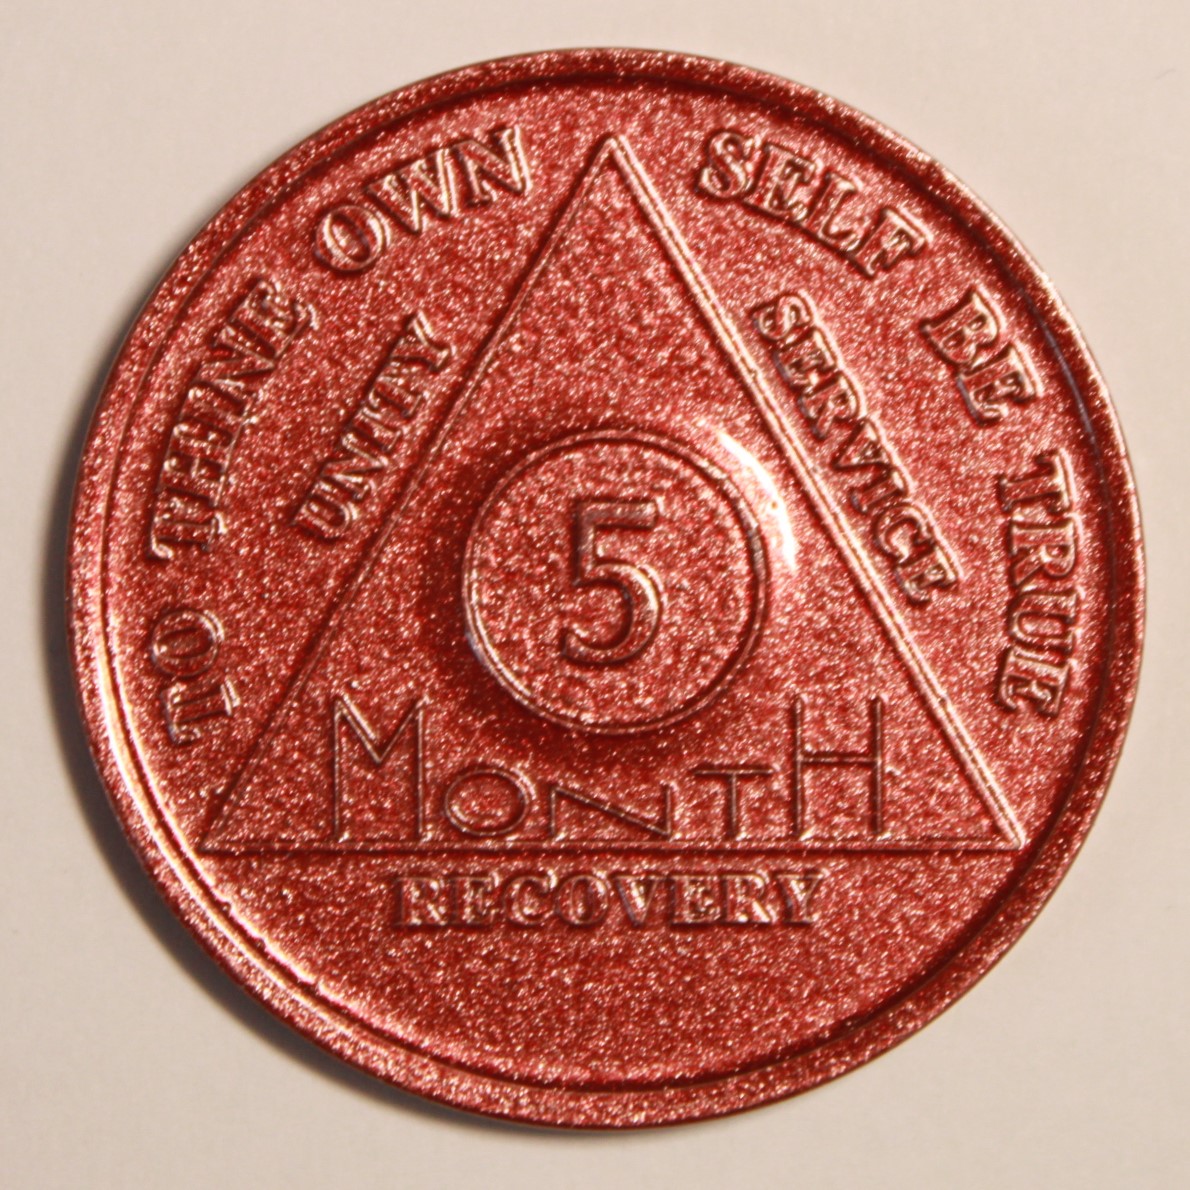 AA Medallion Store - Alcoholics Anonymous Chips, Coins, Tokens + More